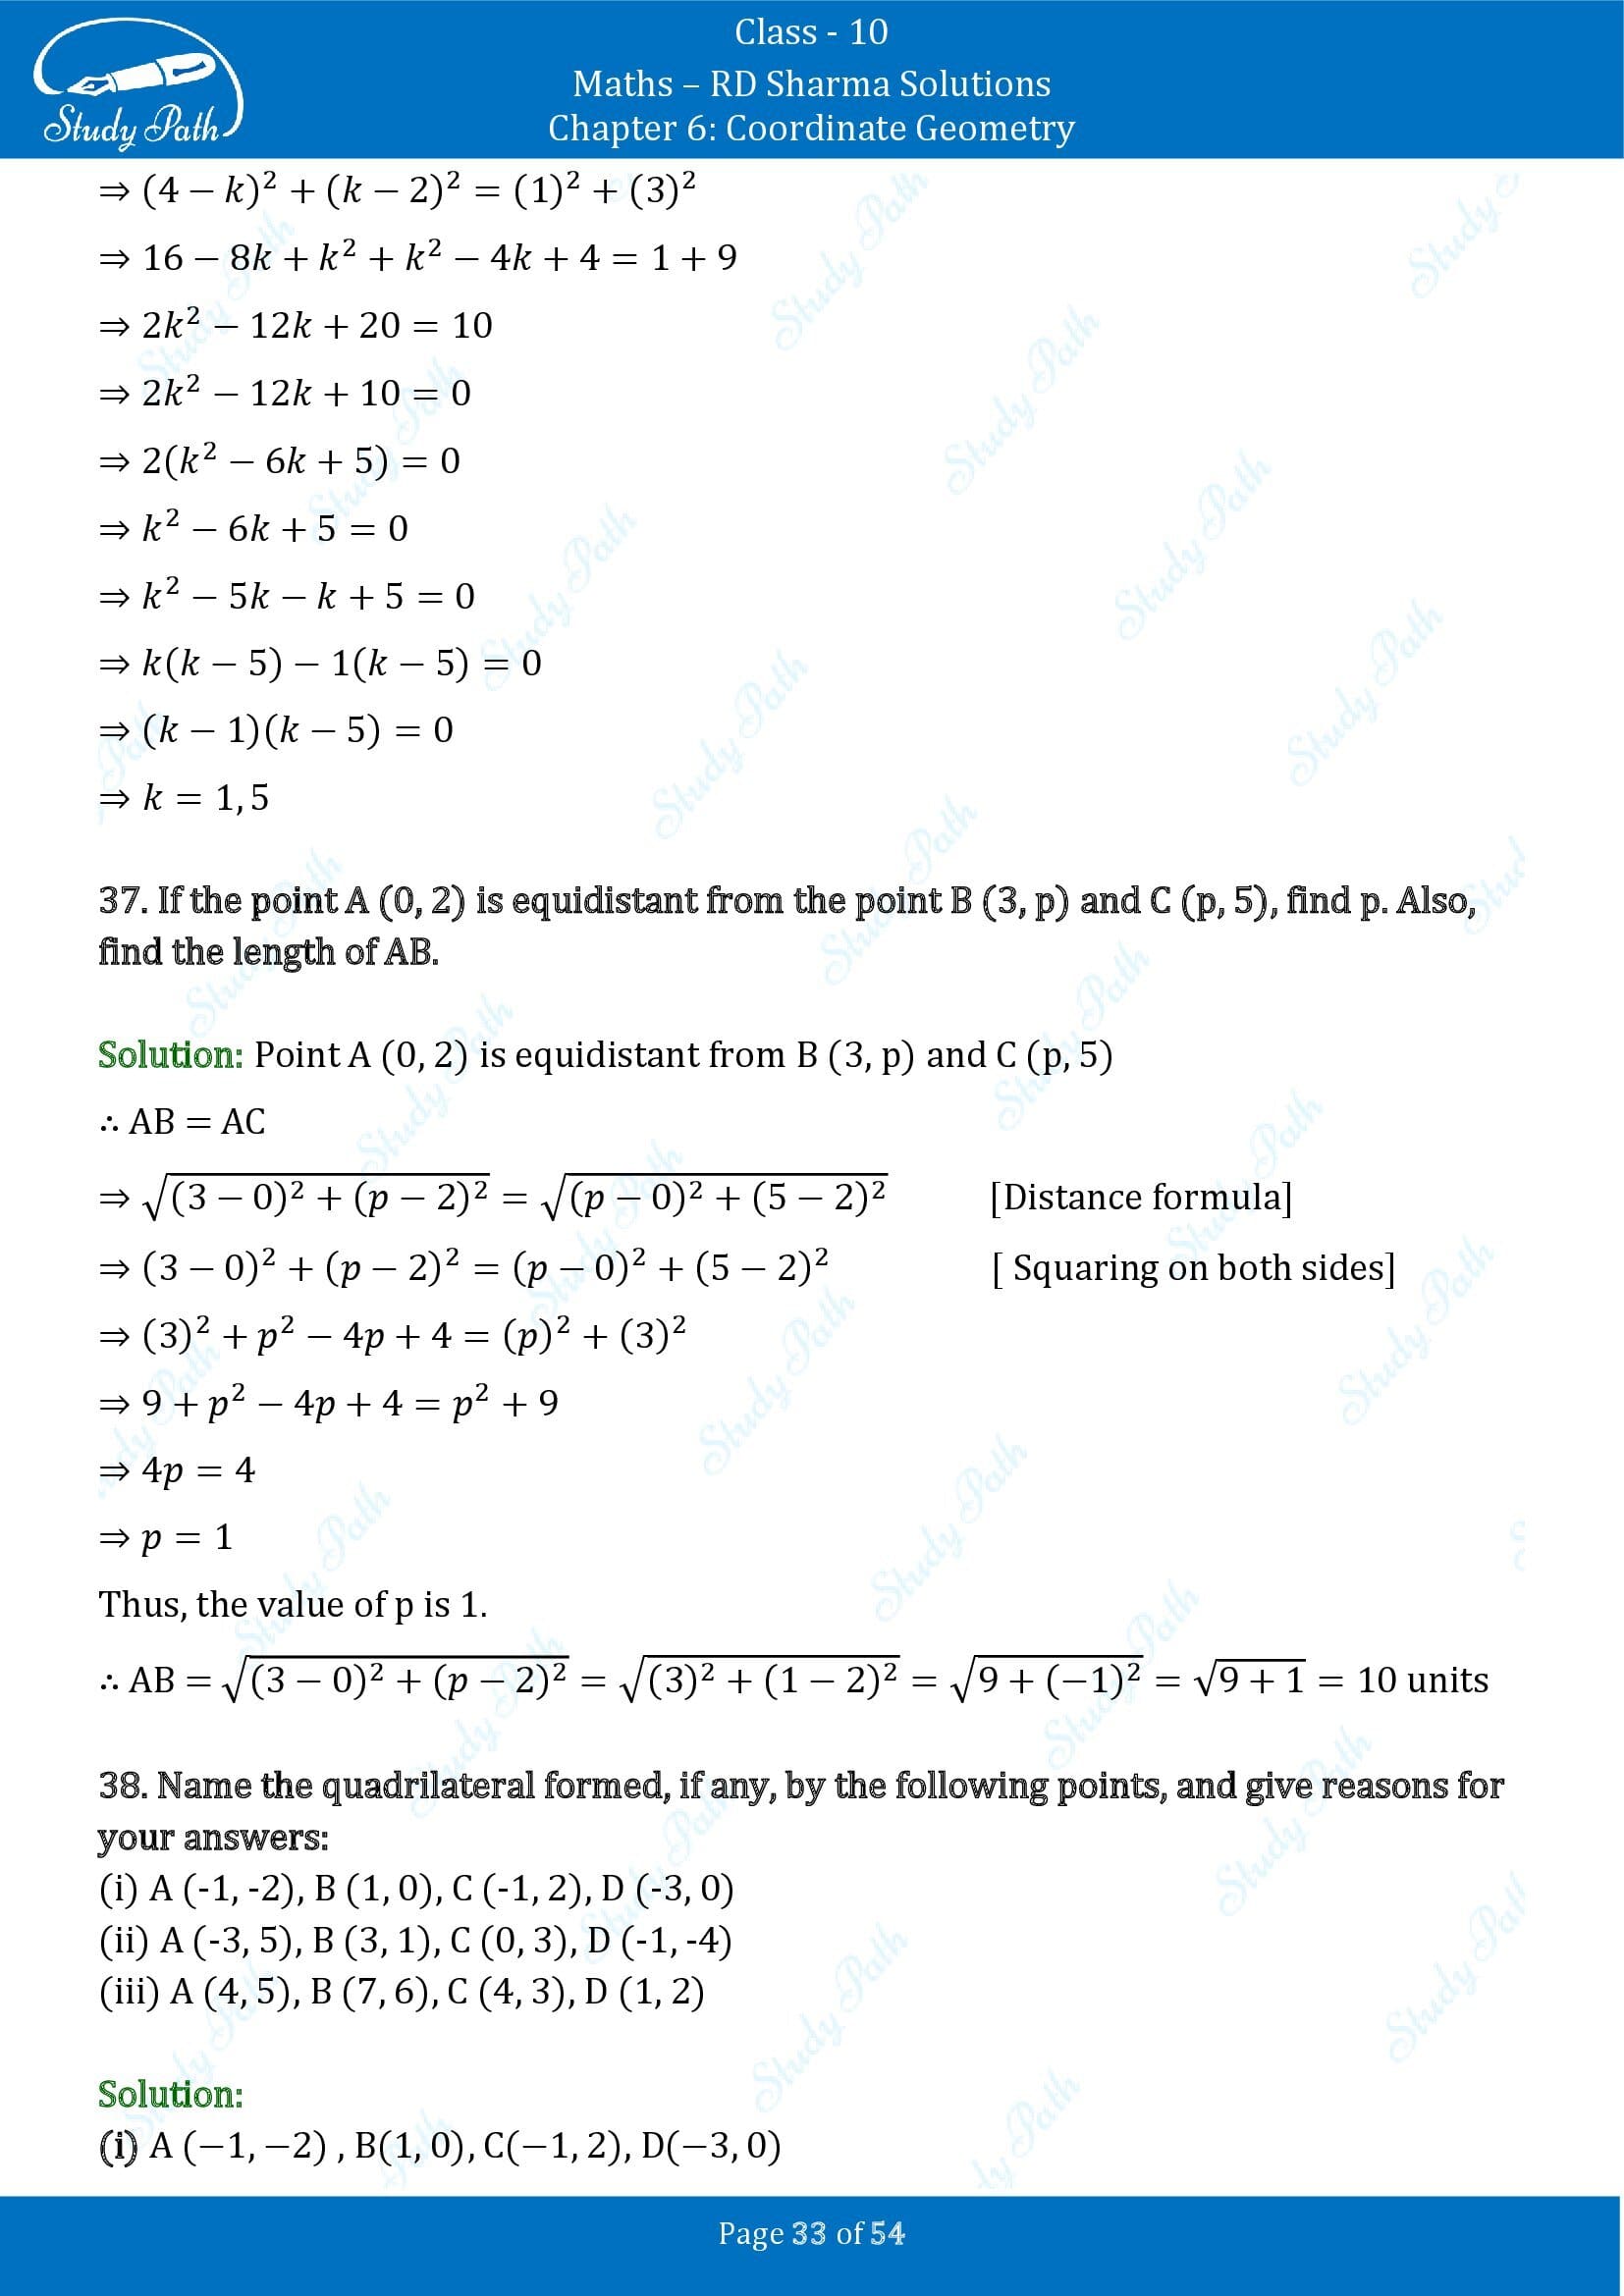 RD Sharma Solutions Class 10 Chapter 6 Coordinate Geometry Exercise 6.2 0033